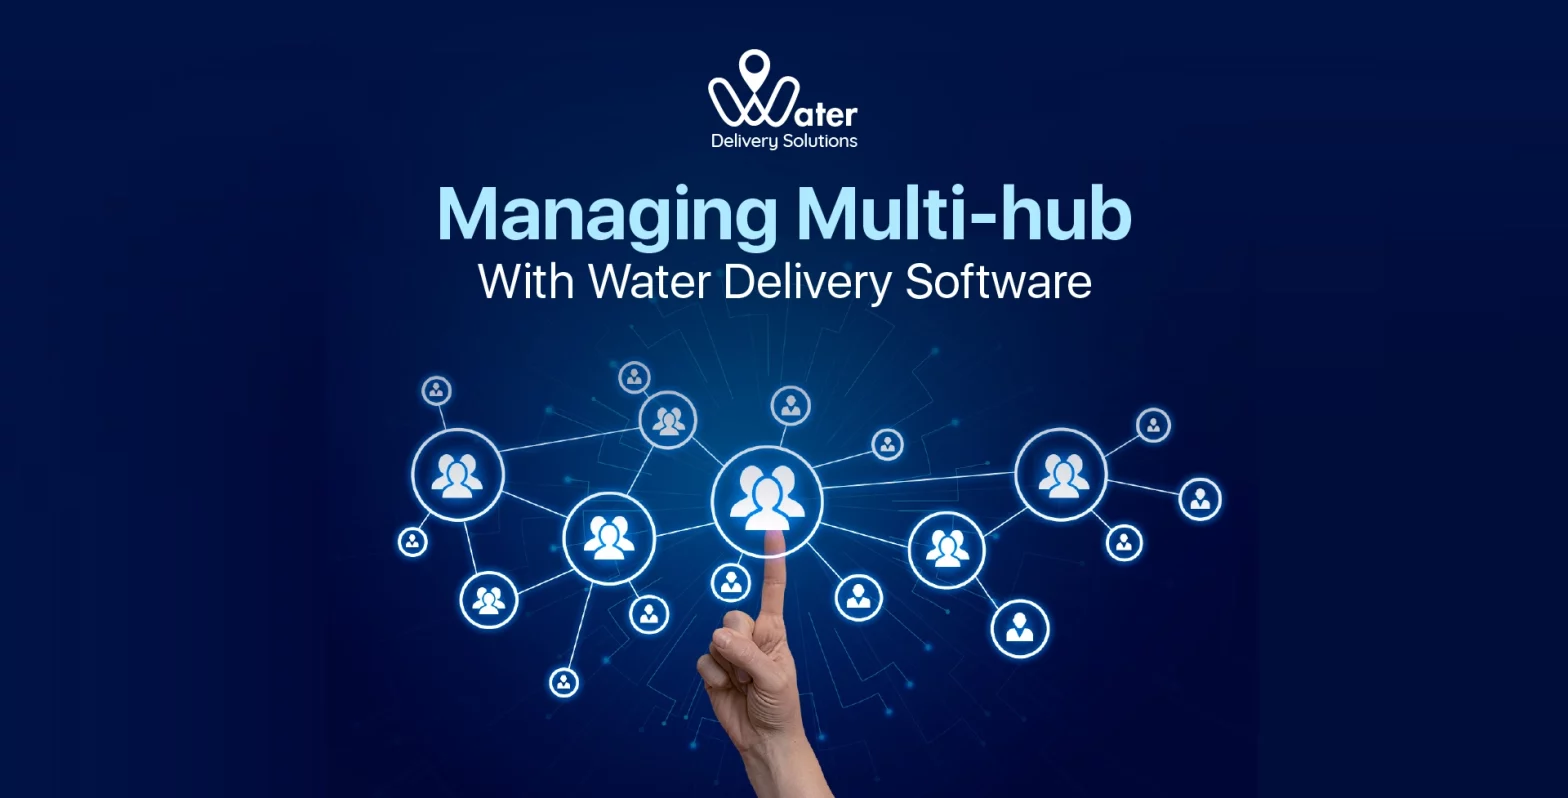 wds-founded-by-ravi-garg-website-insights-manage-multi-hub-with-water-delivery-software